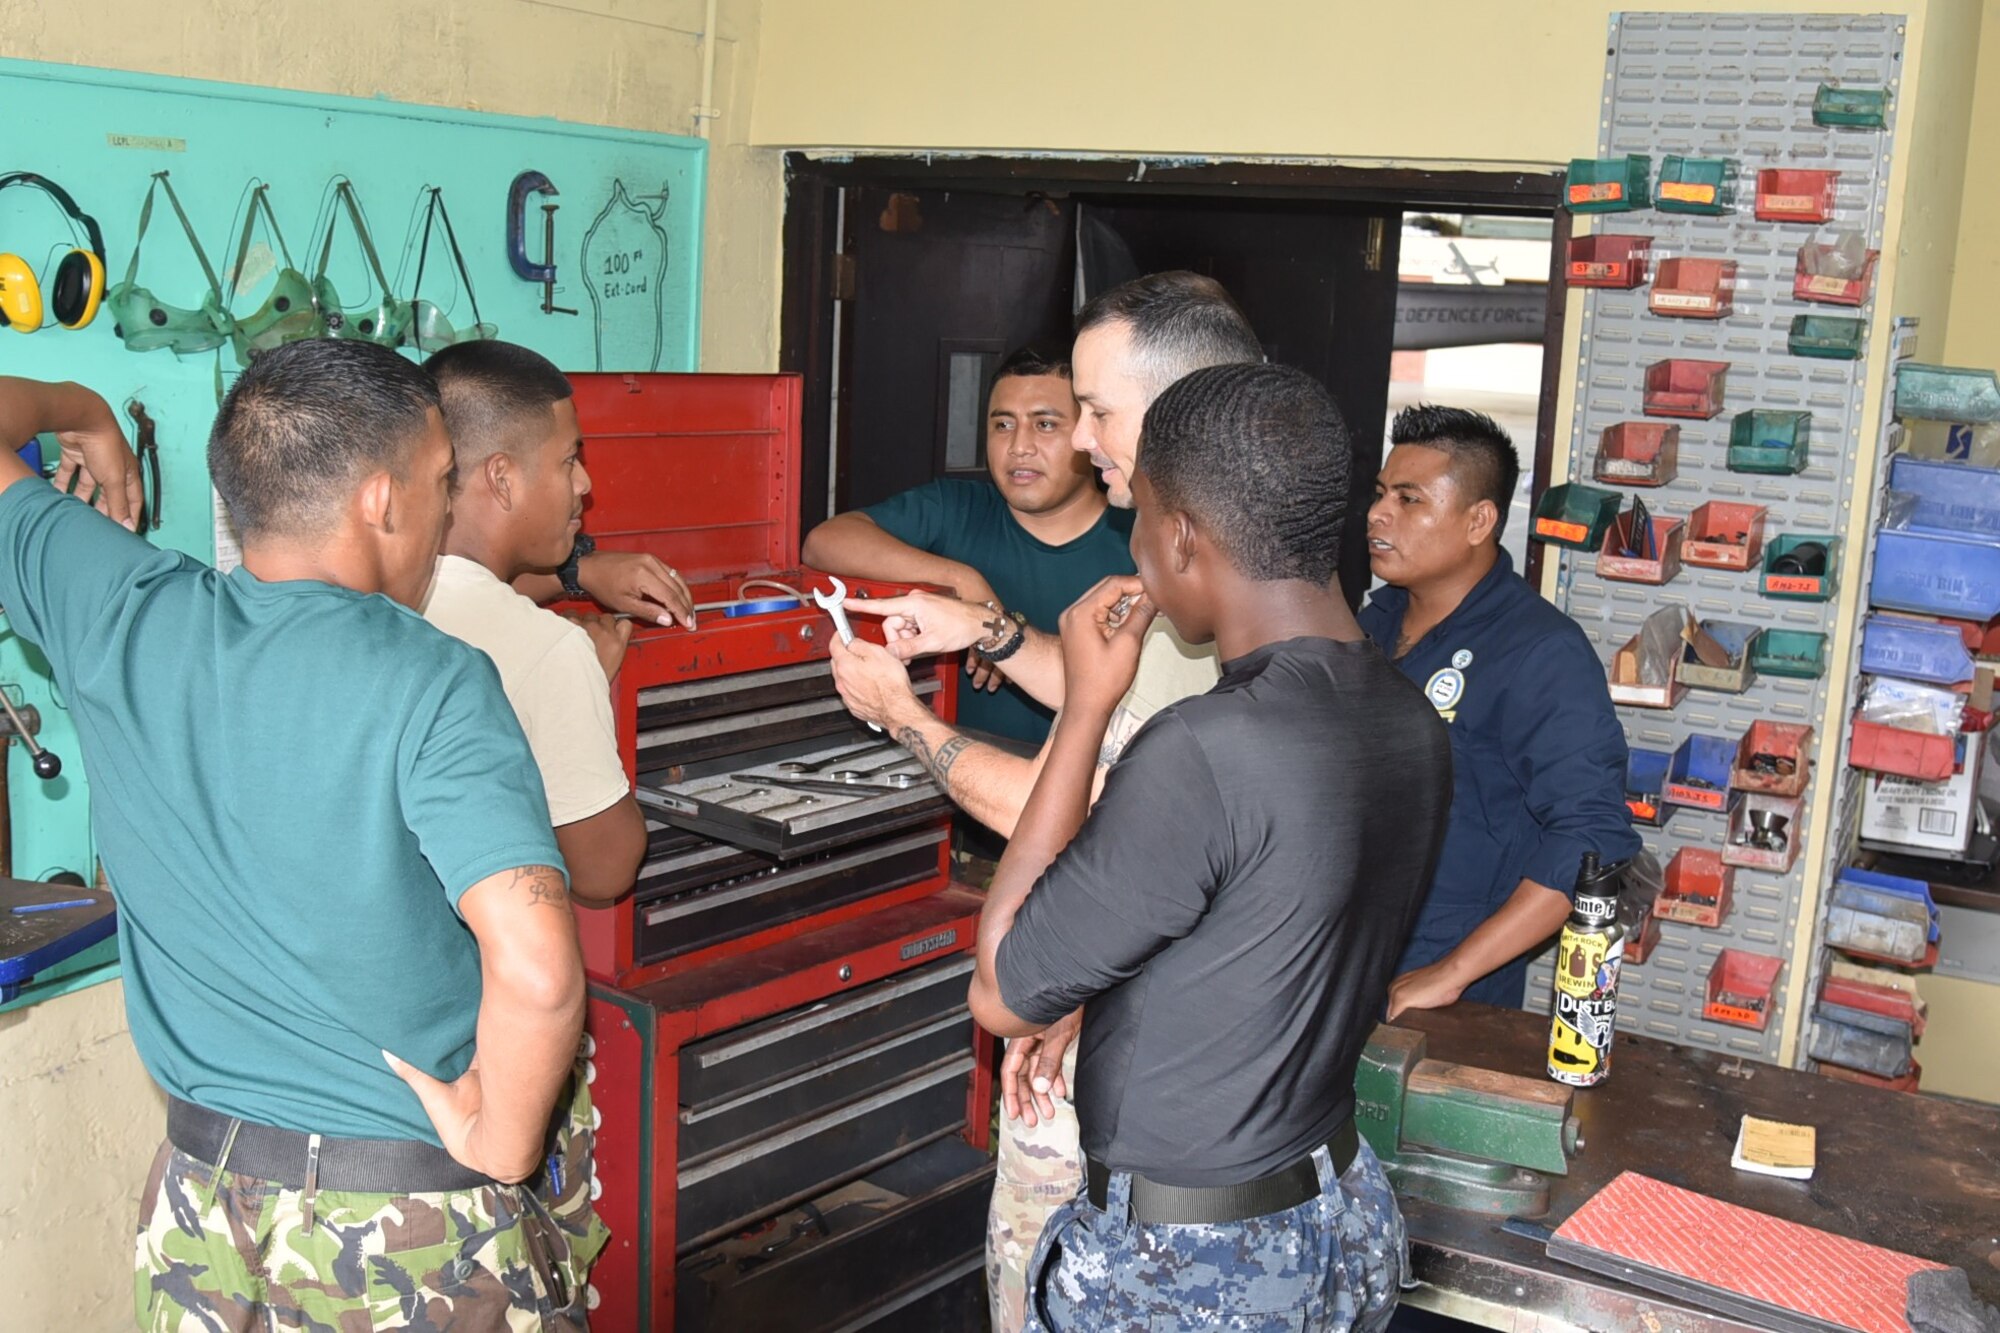 Master Sgt. Raphael Romero, 571st Mobility Support Advisory Squadron aircraft maintenance air advisor, trains members from the Belize Defense Force Air Wing on tool control techniques during a mobile training mission in Ladyville, Belize. (Courtesy Photo)